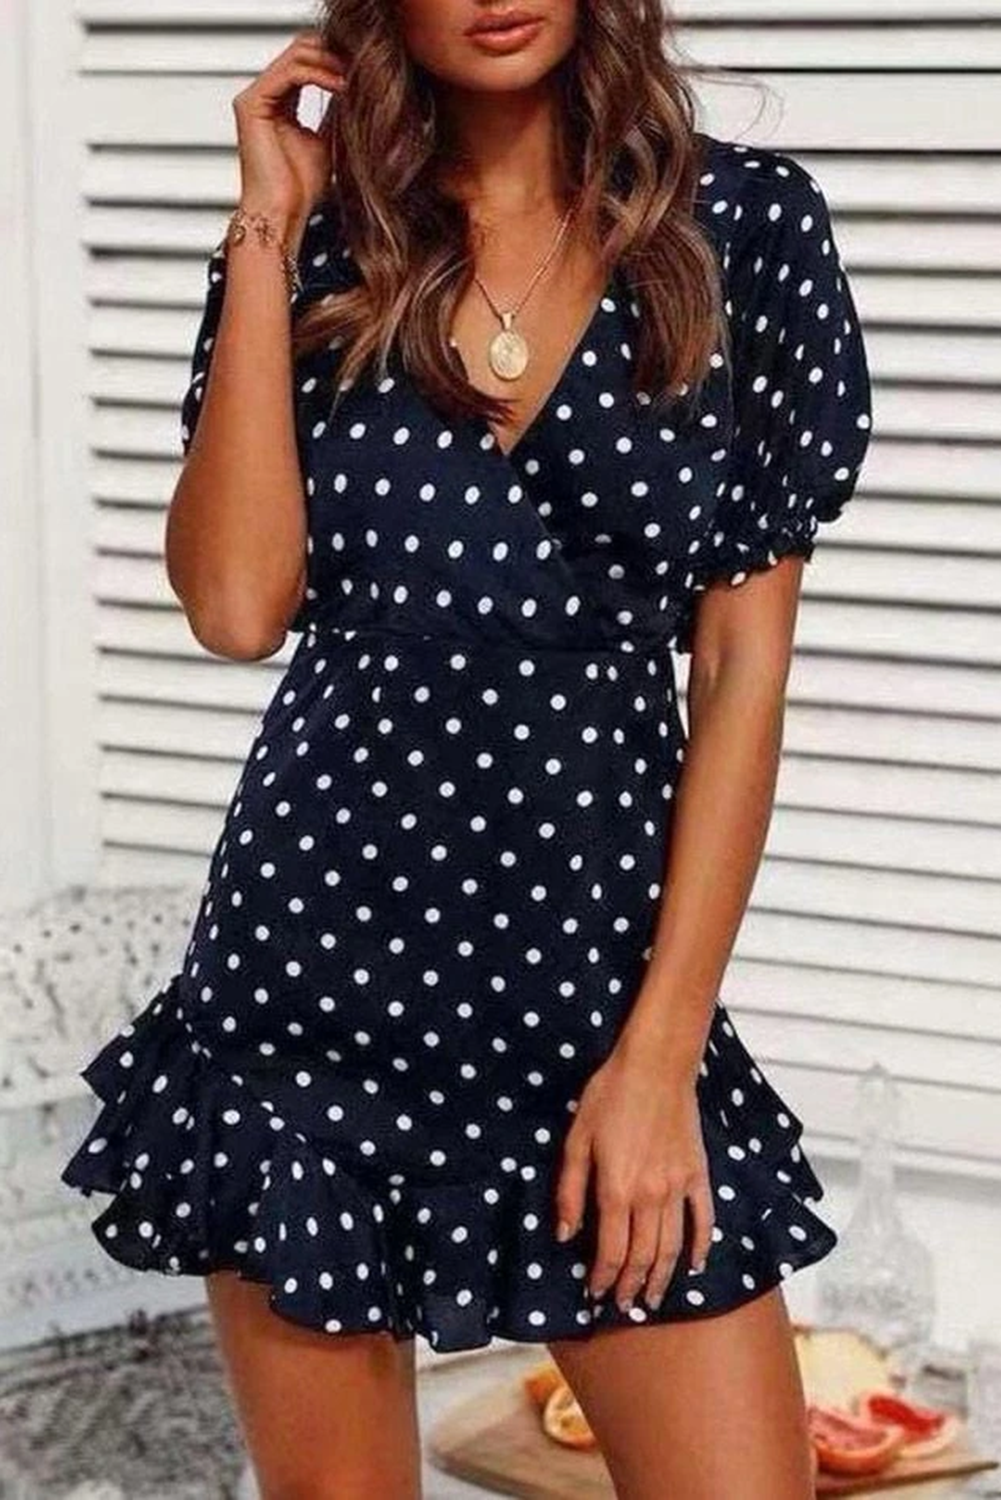 Wholesale Other Category, Cheap Polka Dot Open Back Tie Ruffled Mini